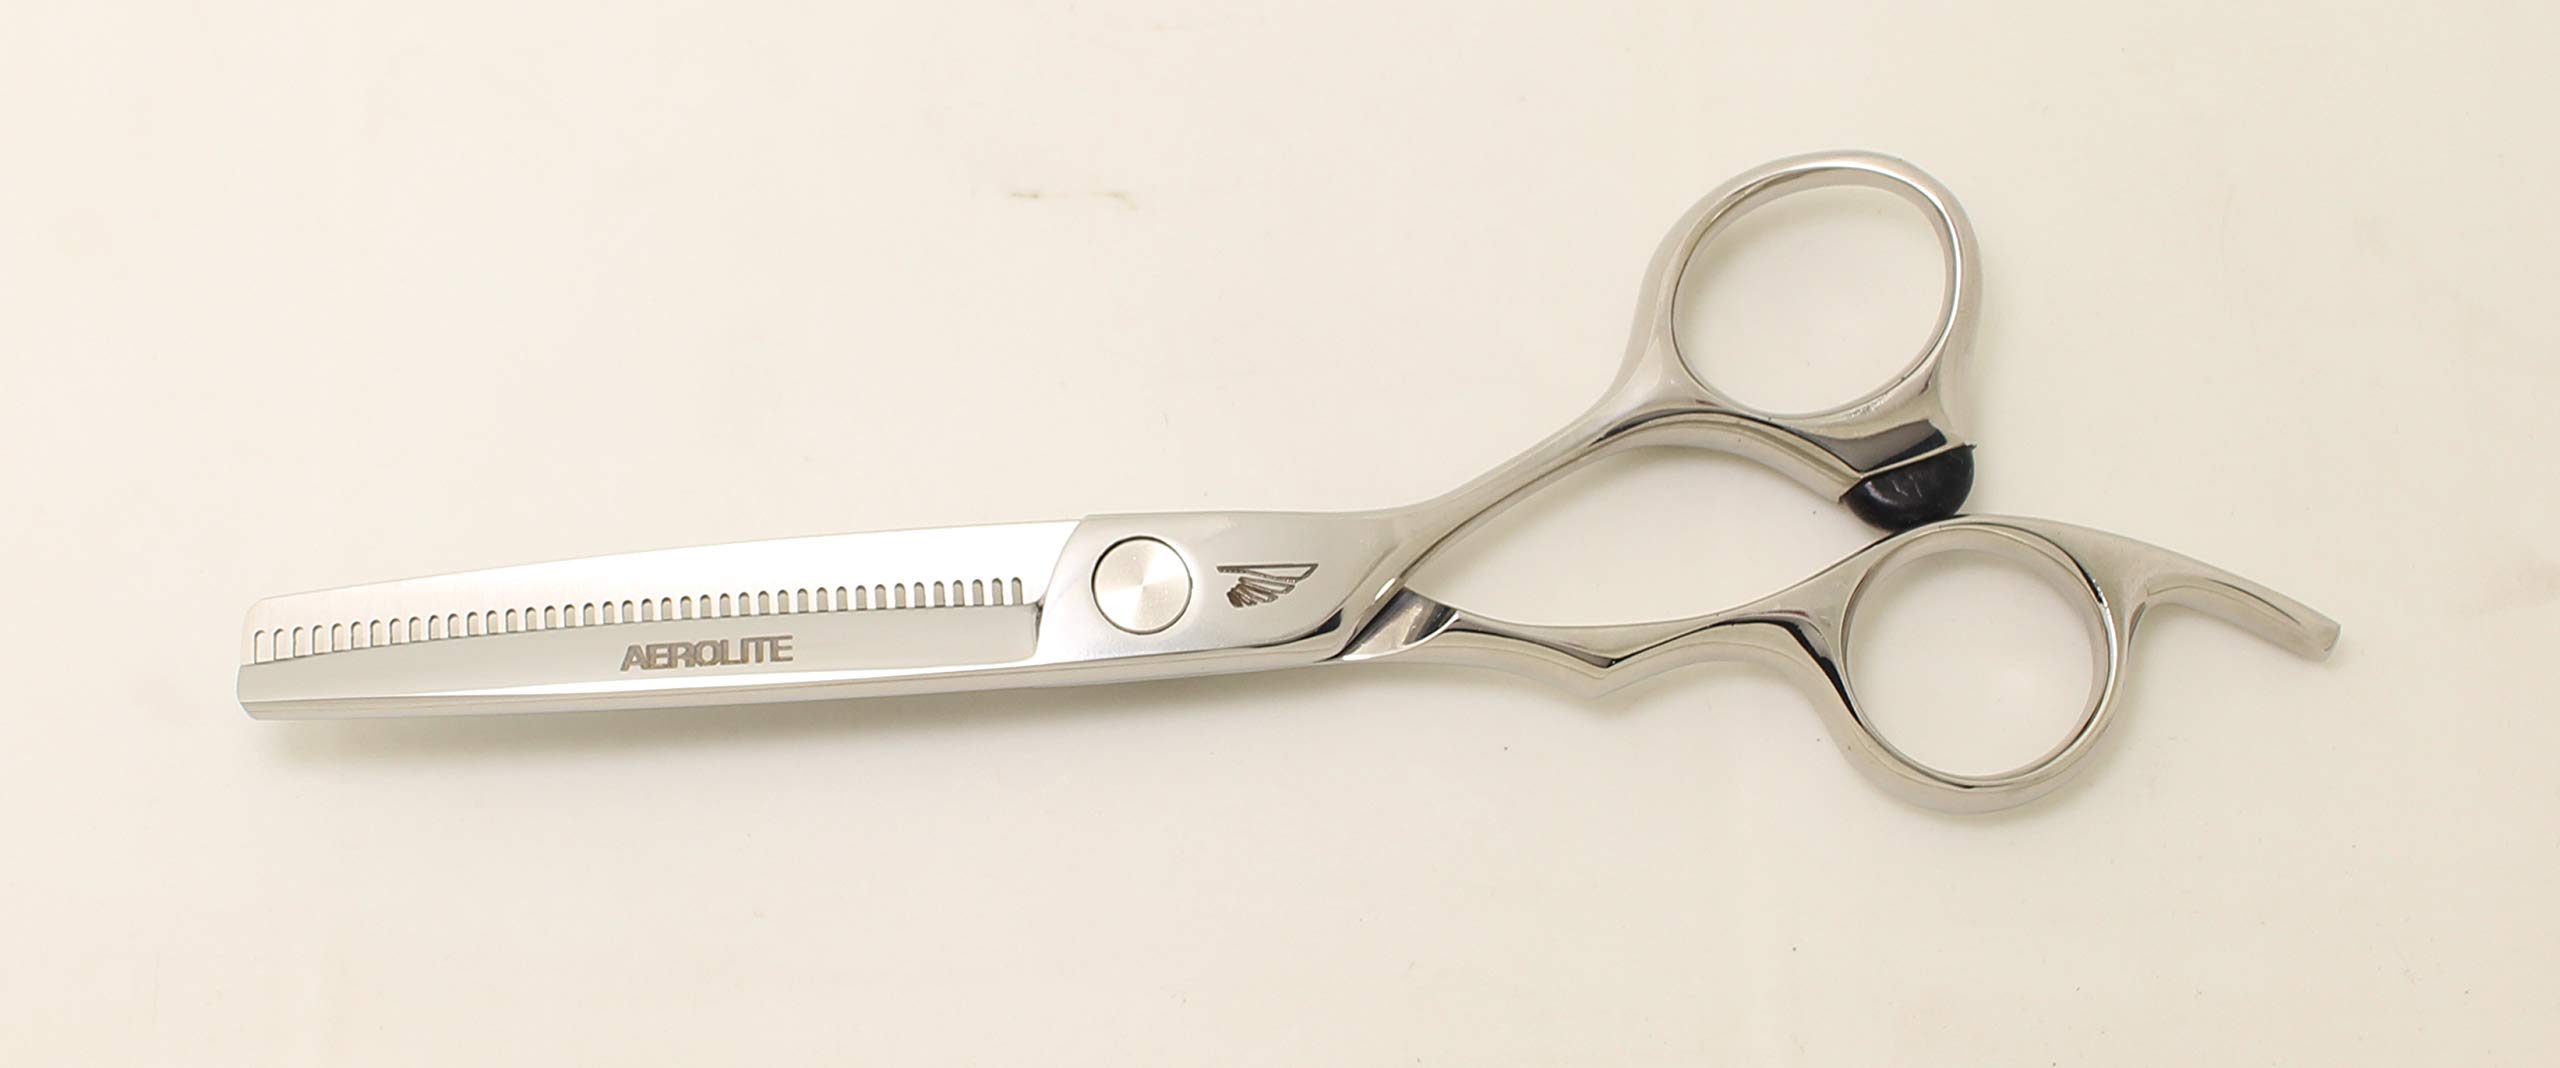 Hitachi Pro Japanese Stainless Steel Professional Thinning Shears-Scissors/Texturizing & Haircut Thinning/Aircraft Alloy Handle/40 Hair Cutting Teeth/Salon/Stylist/Cosmetology/Barber-6.0